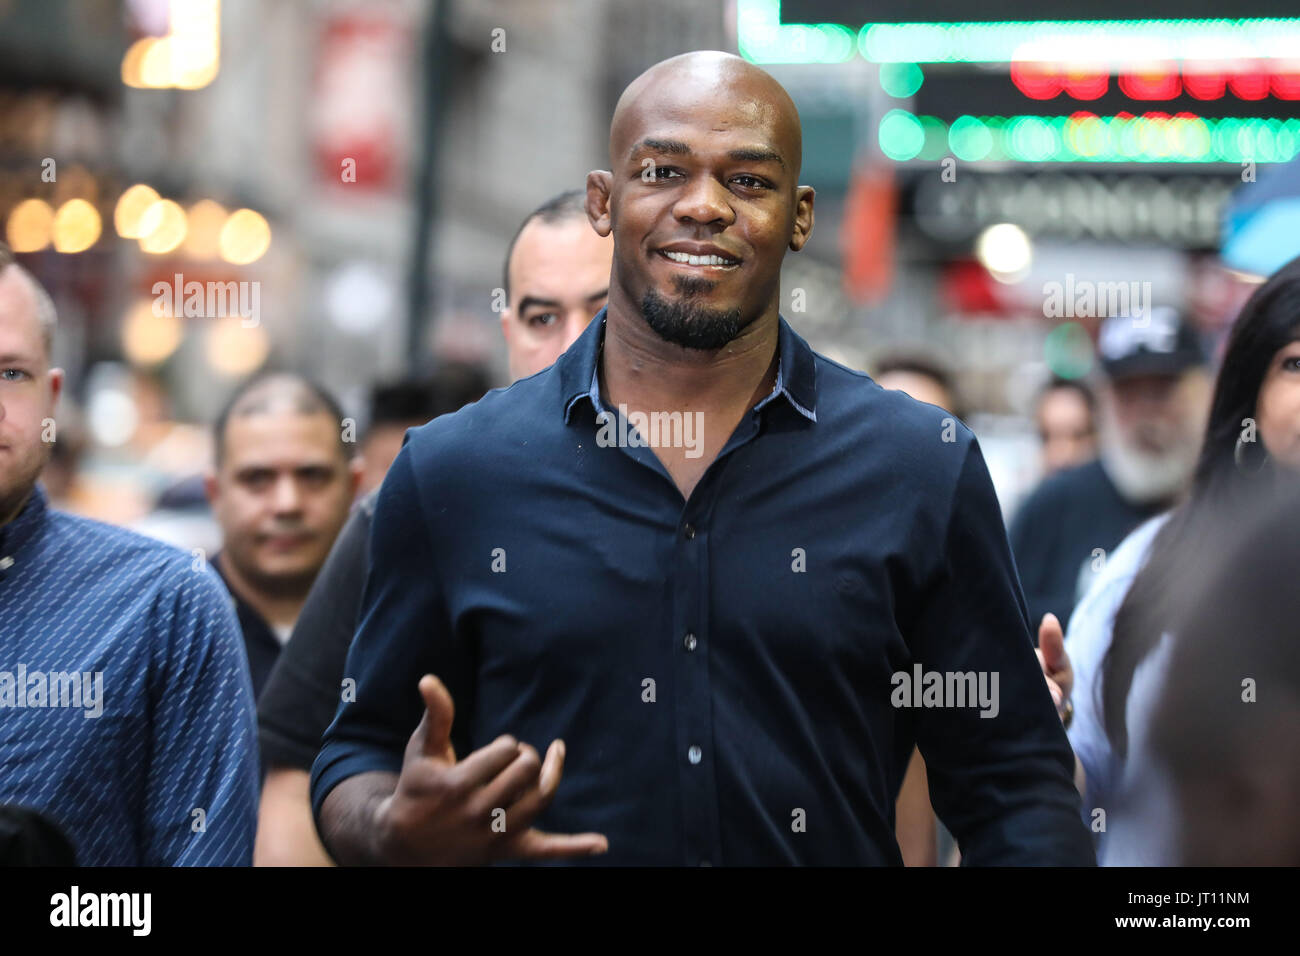 New York, USA. 07th Aug, 2017. Jonathan Dwight Jones, better known as Jon 'Bones' Jones, is an American mixed martial arts fighter, UFC heavyweight champion is seen in the Times Square region in New York this Monday Thursday, 07. (Photo: William Volcov/Brazil Photo Press) Stock Photo